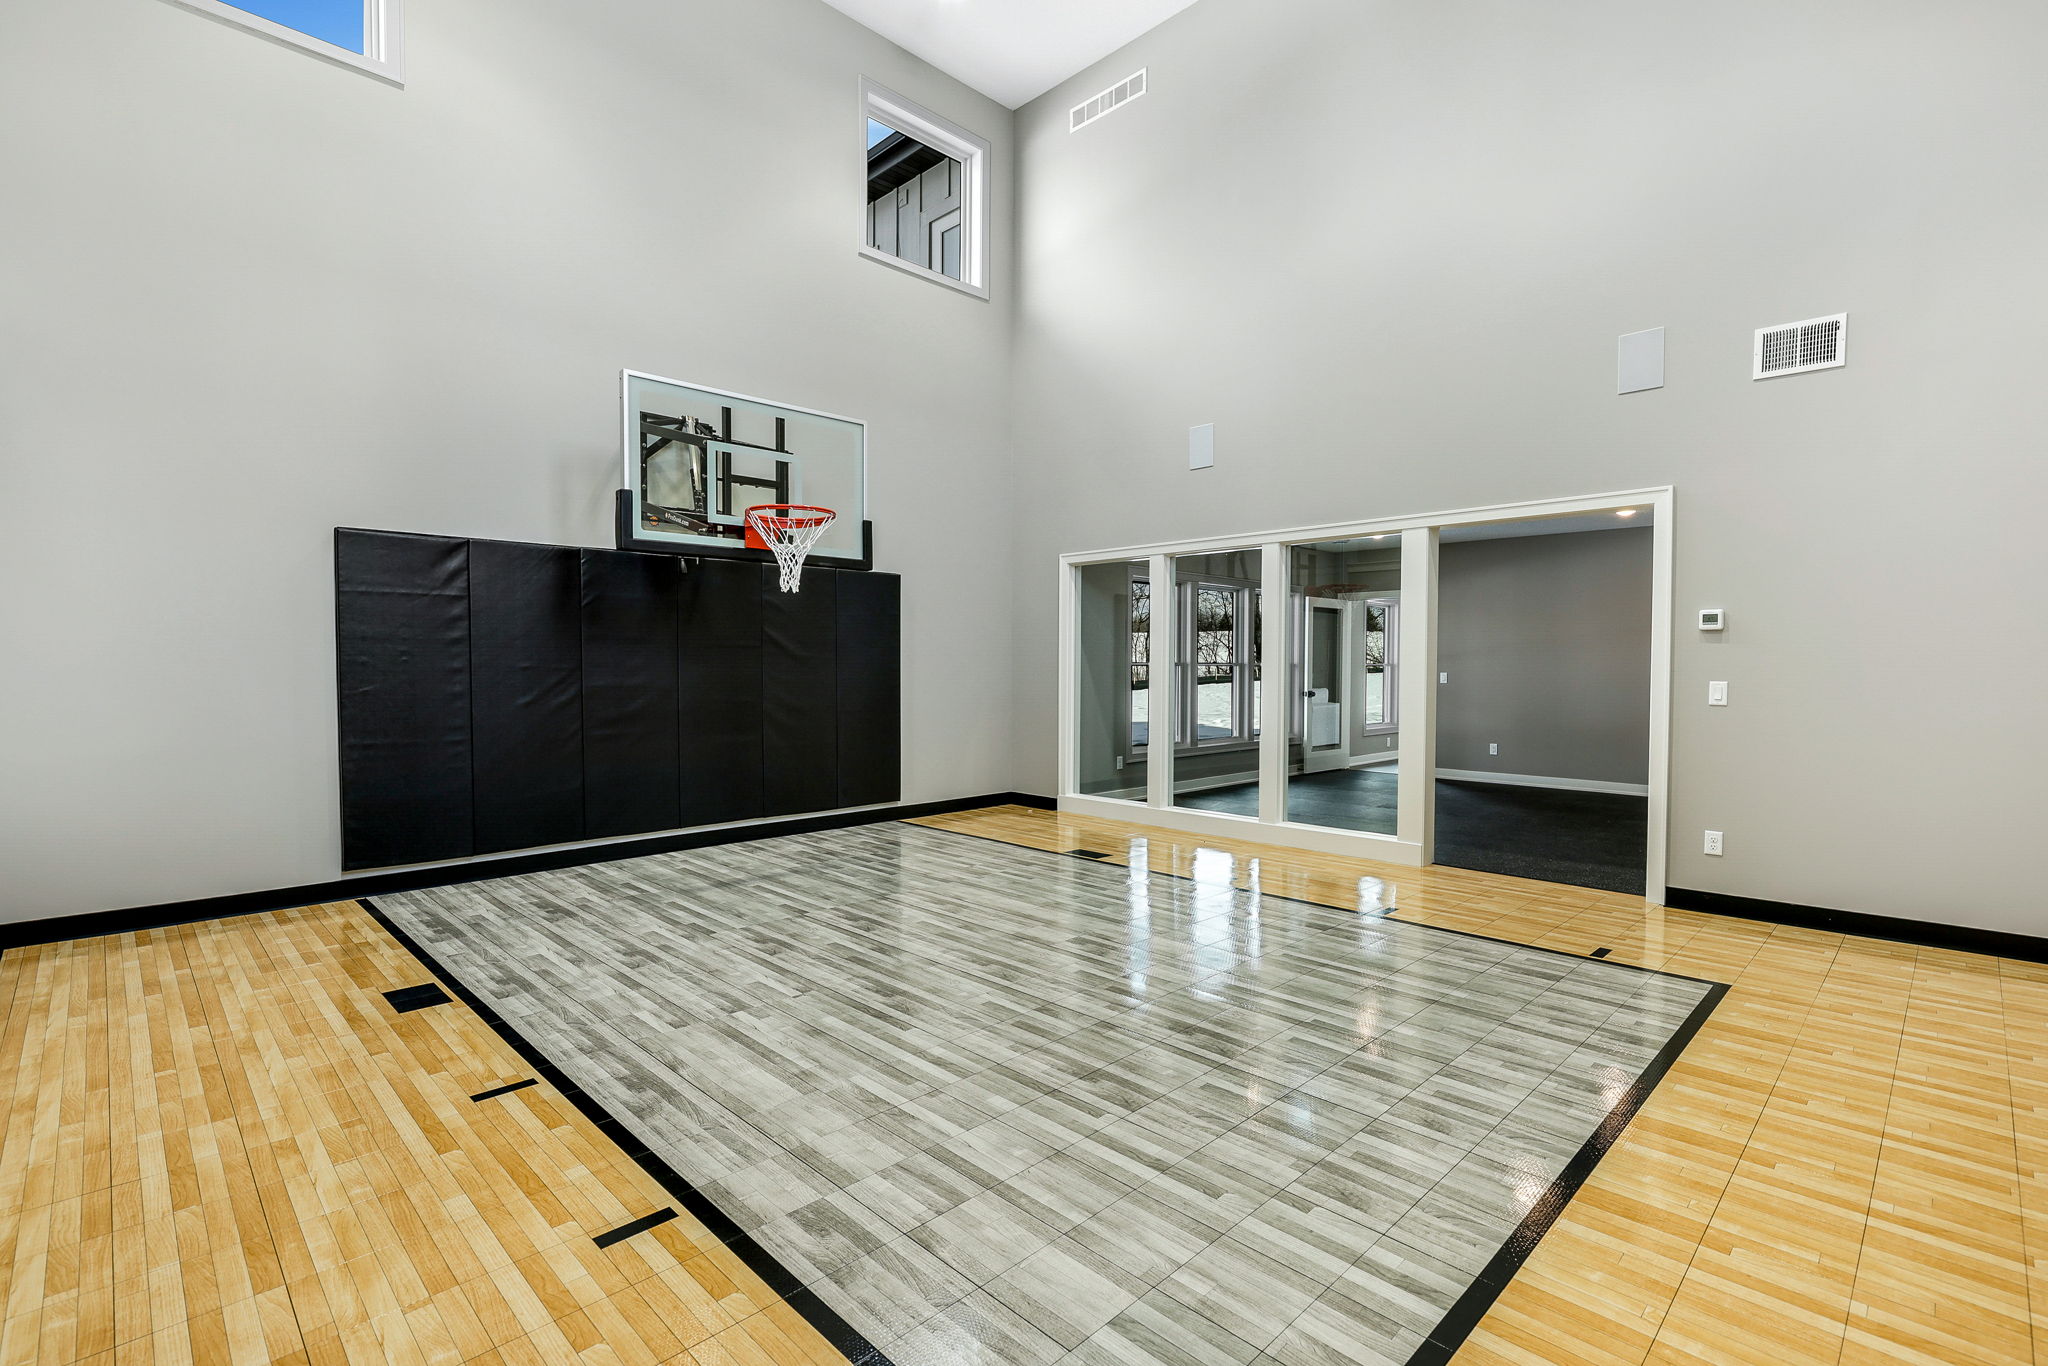 7972-207th-street-east-credit-river-mn-indoor-basketball-court